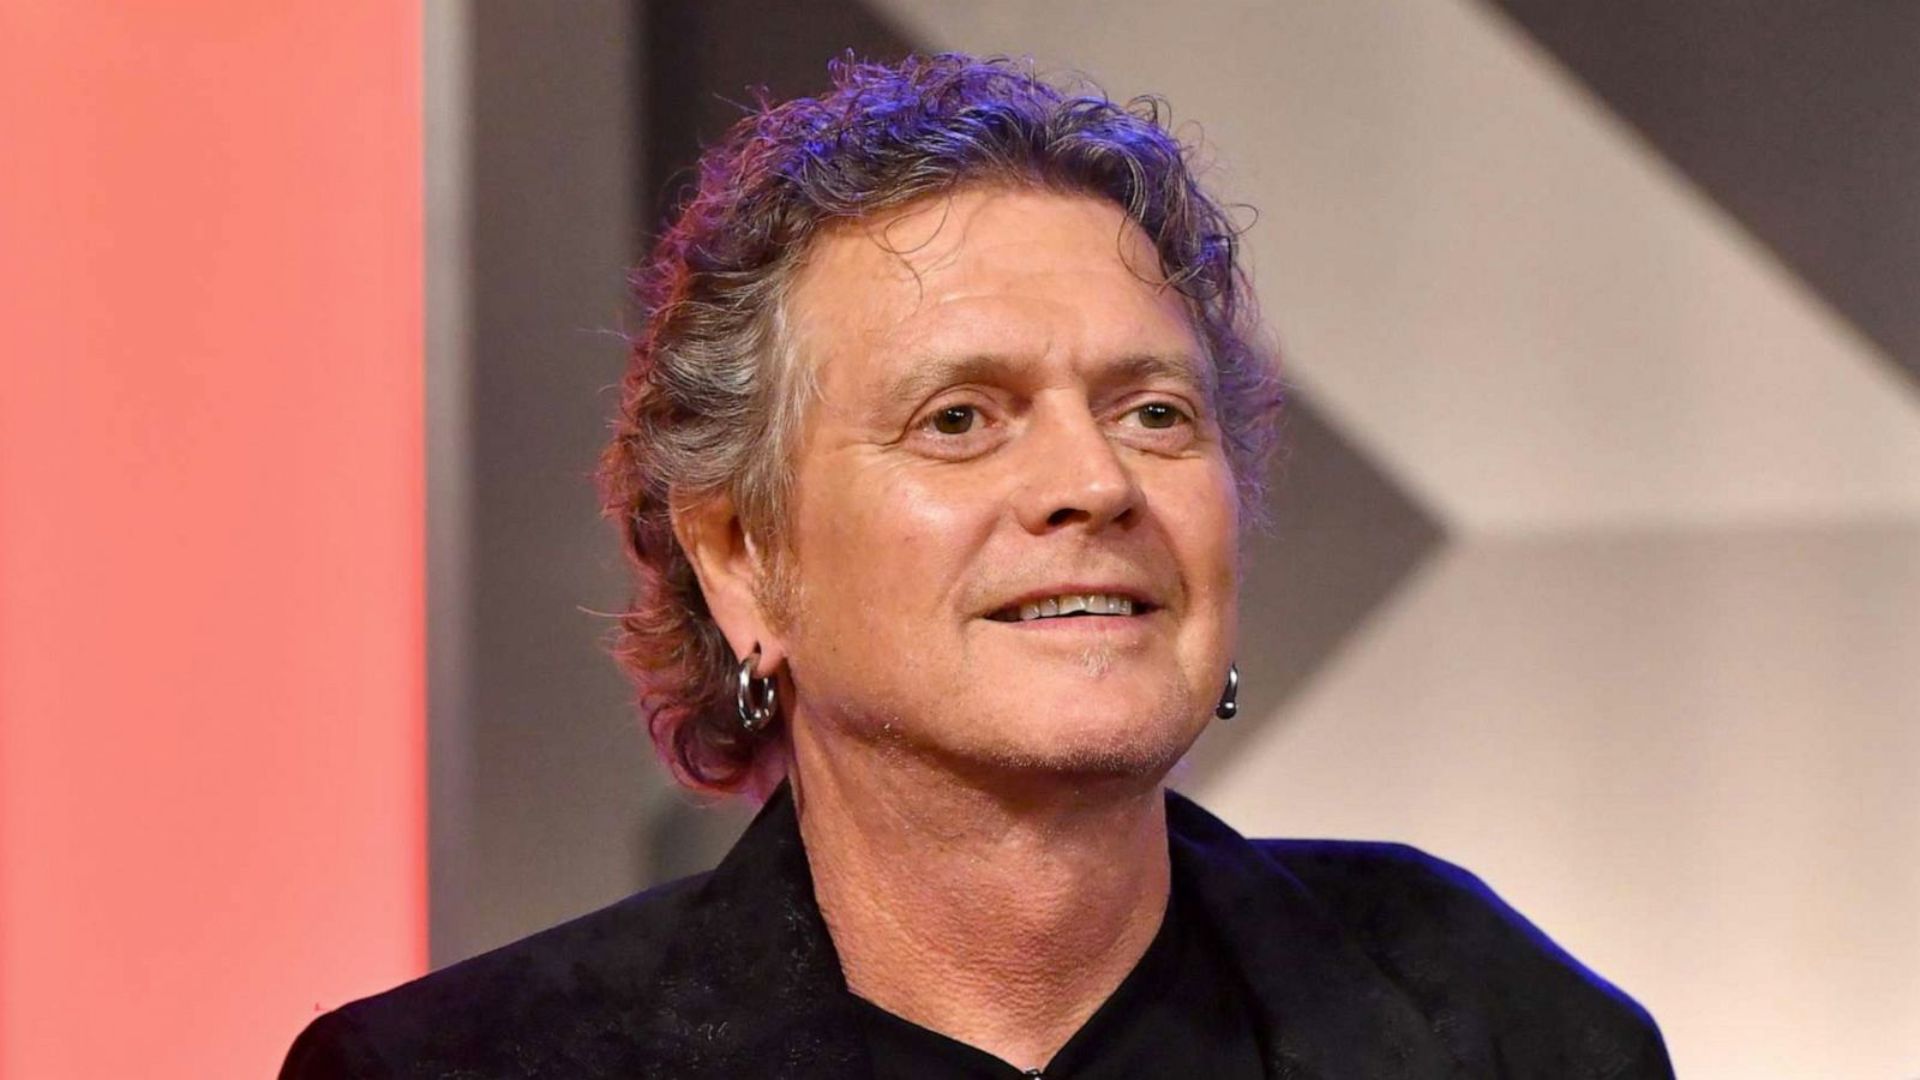 Rick Allen provides health updates after being attacked in a hotel